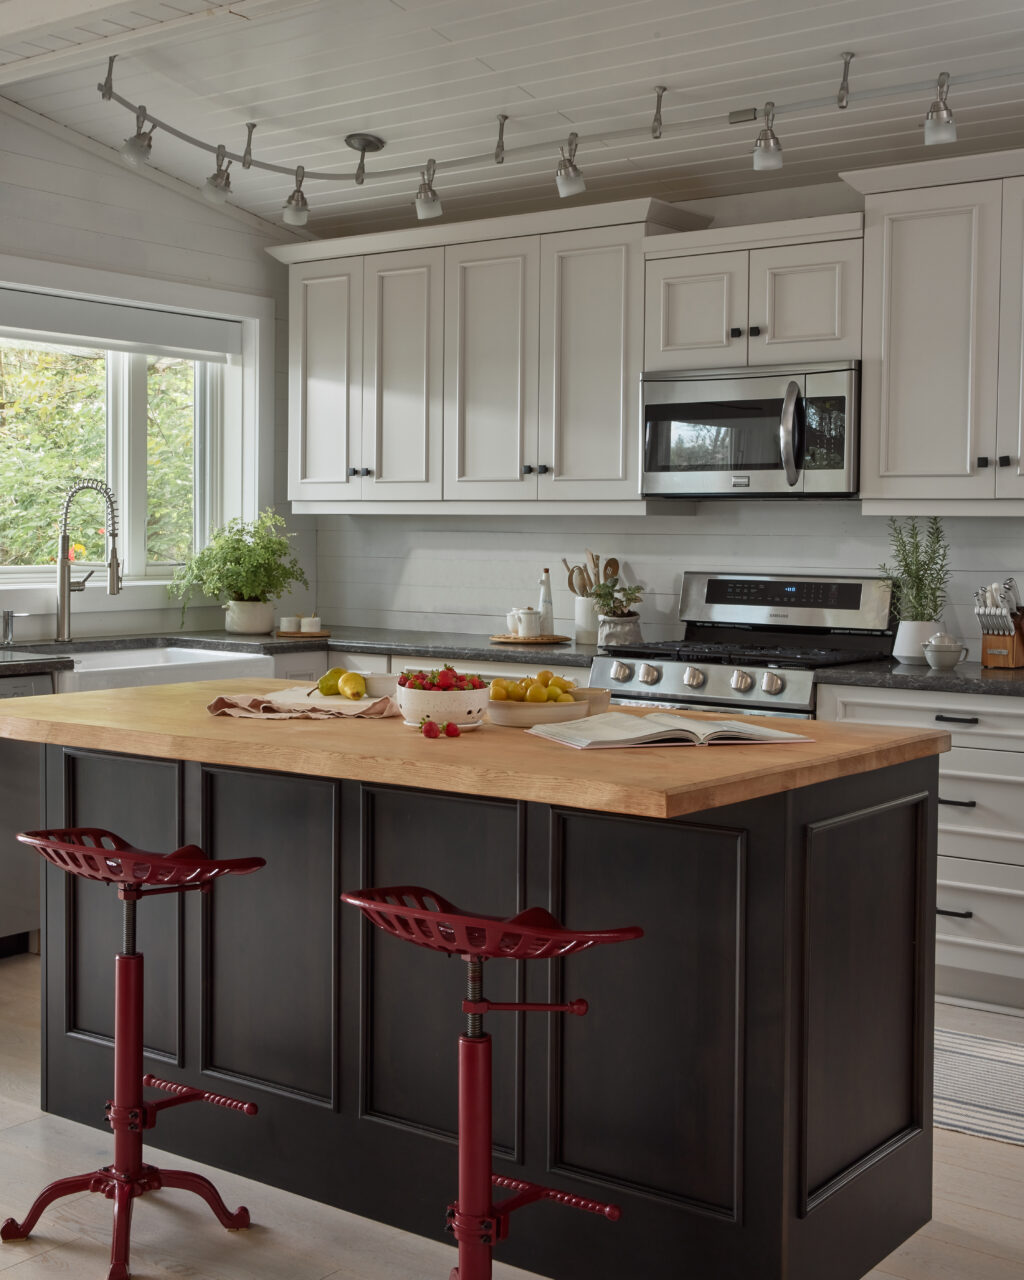 Kitchen with white cabinets, dark grey island and red stools. Staged with fresh fruit & a recipe book on the island.